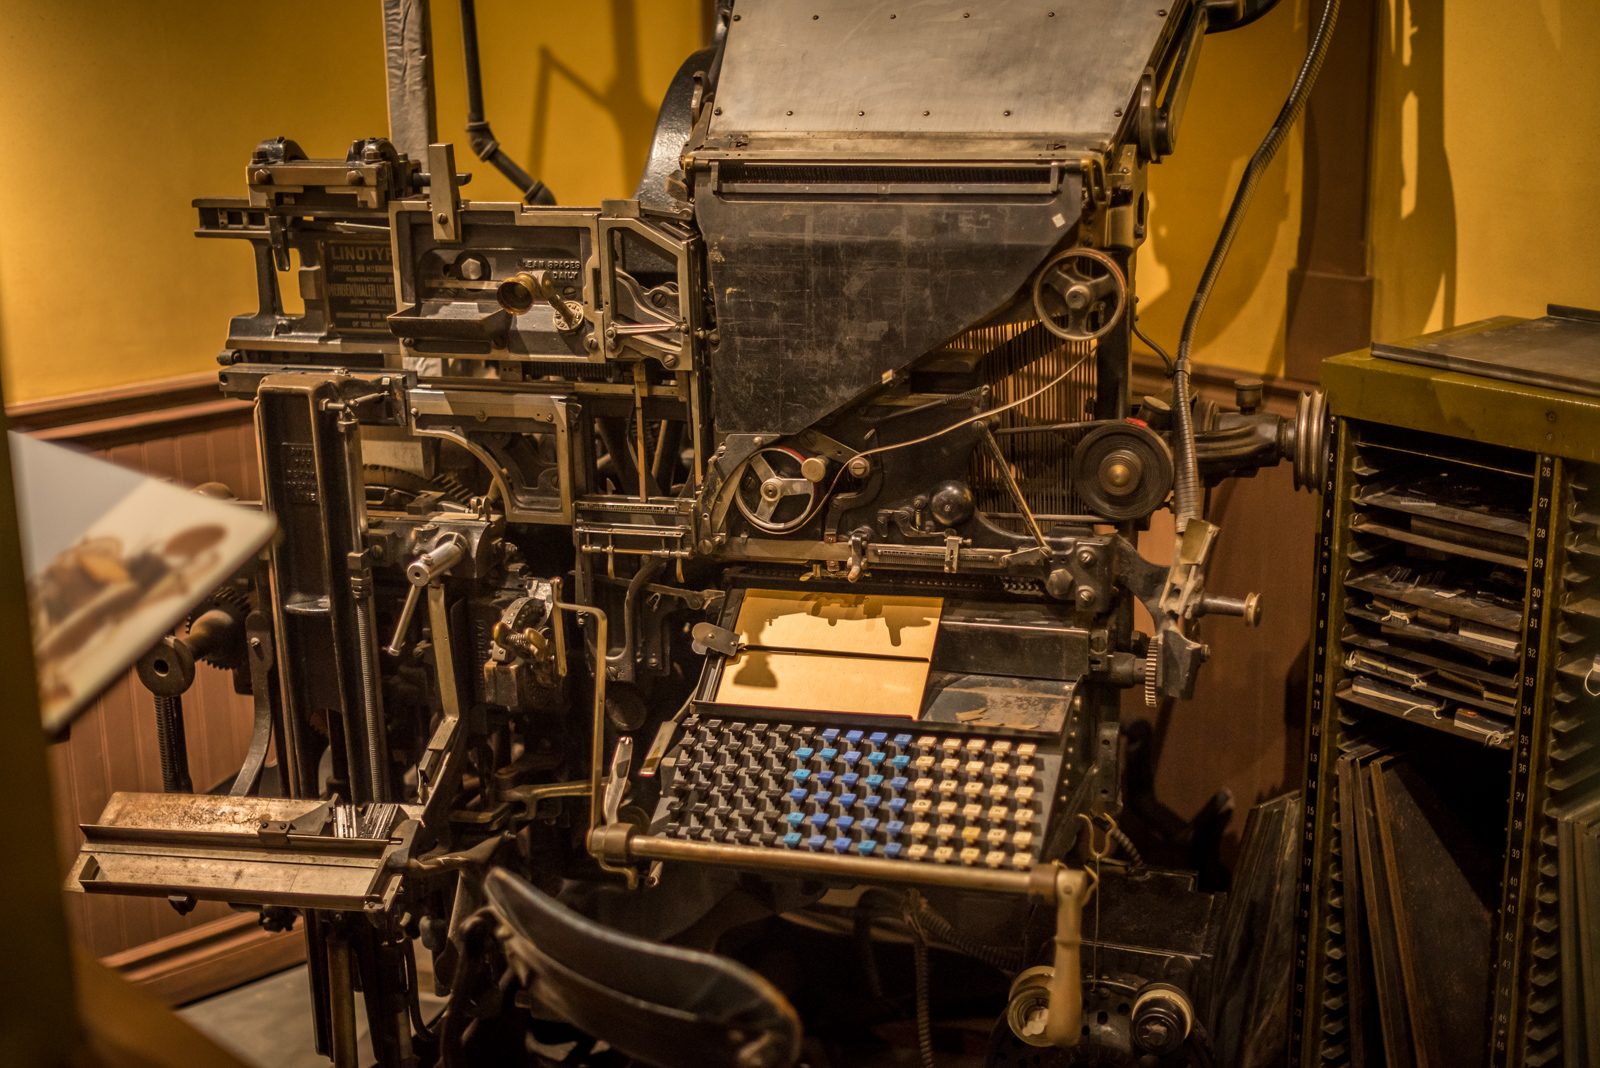 A linotype machine on display in the ‘Surrey Stories Gallery’